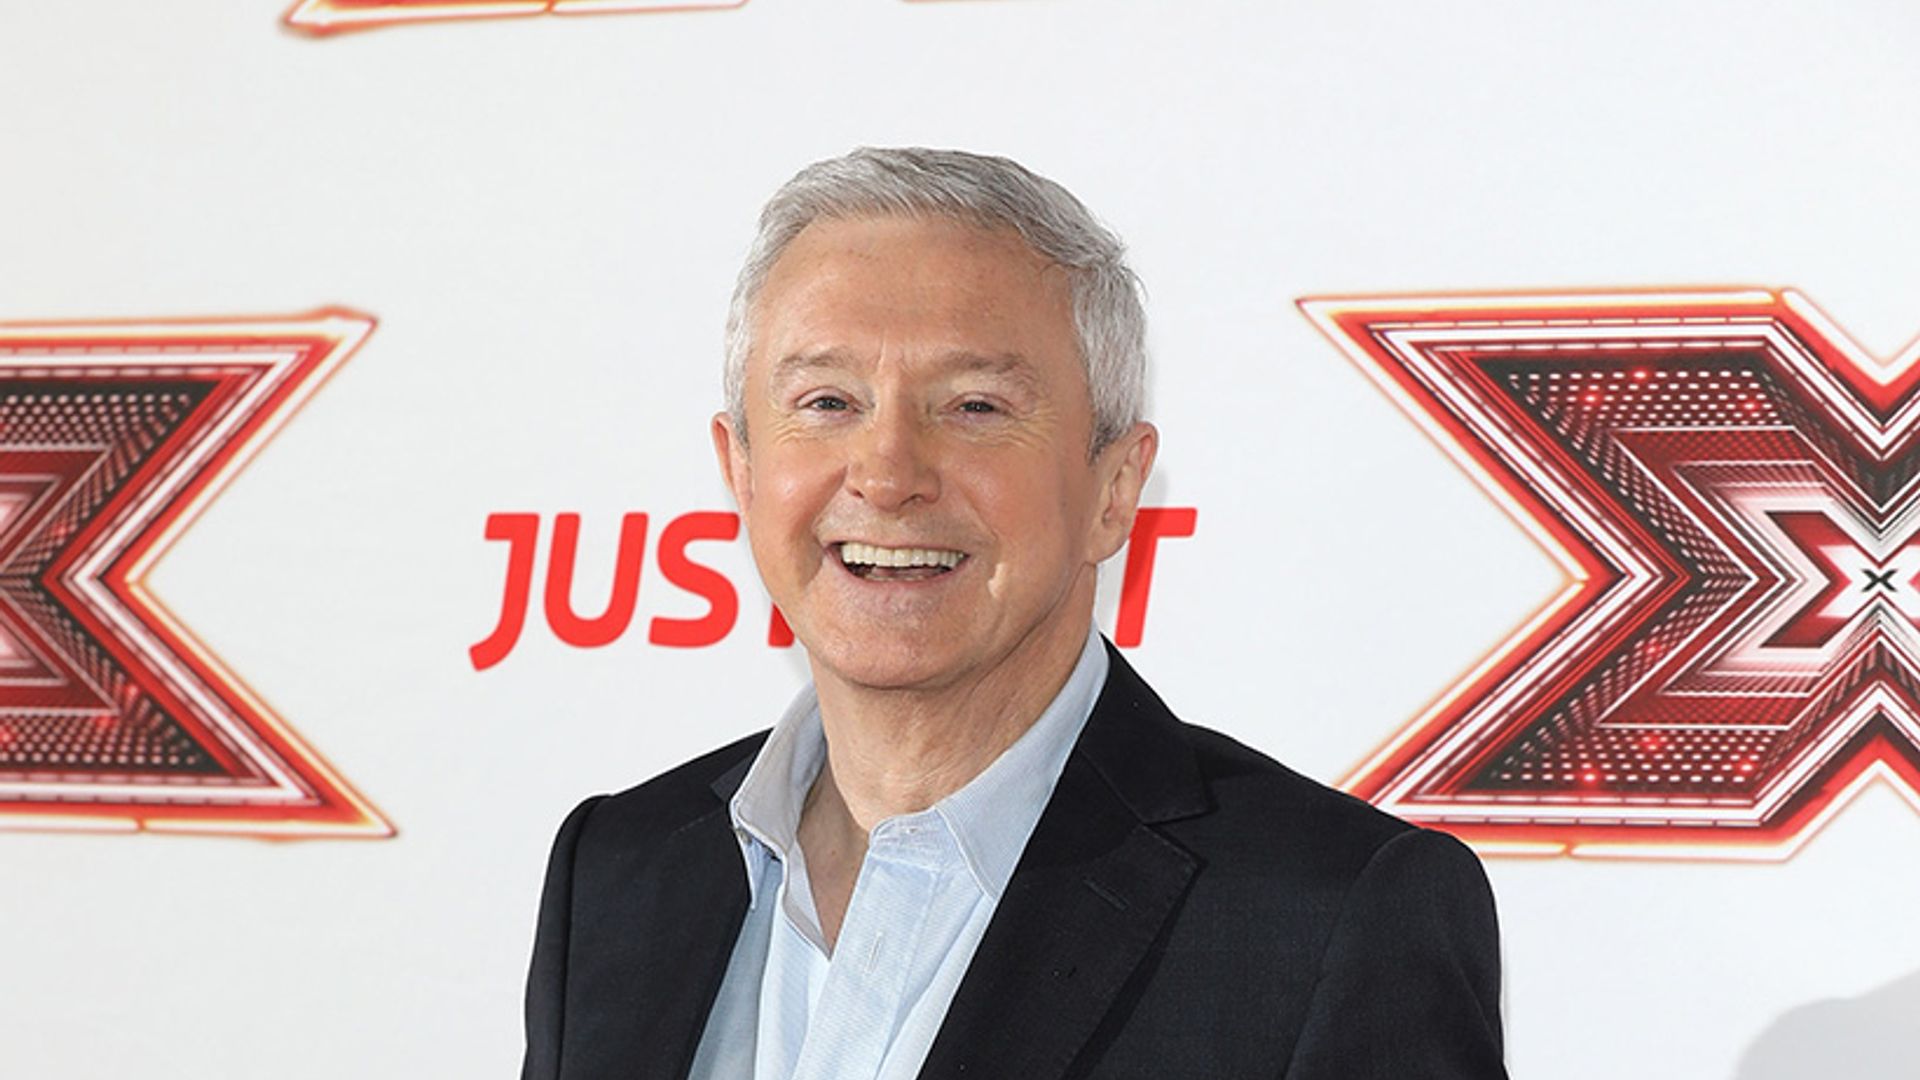 Louis Walsh quits the X Factor after 13 years